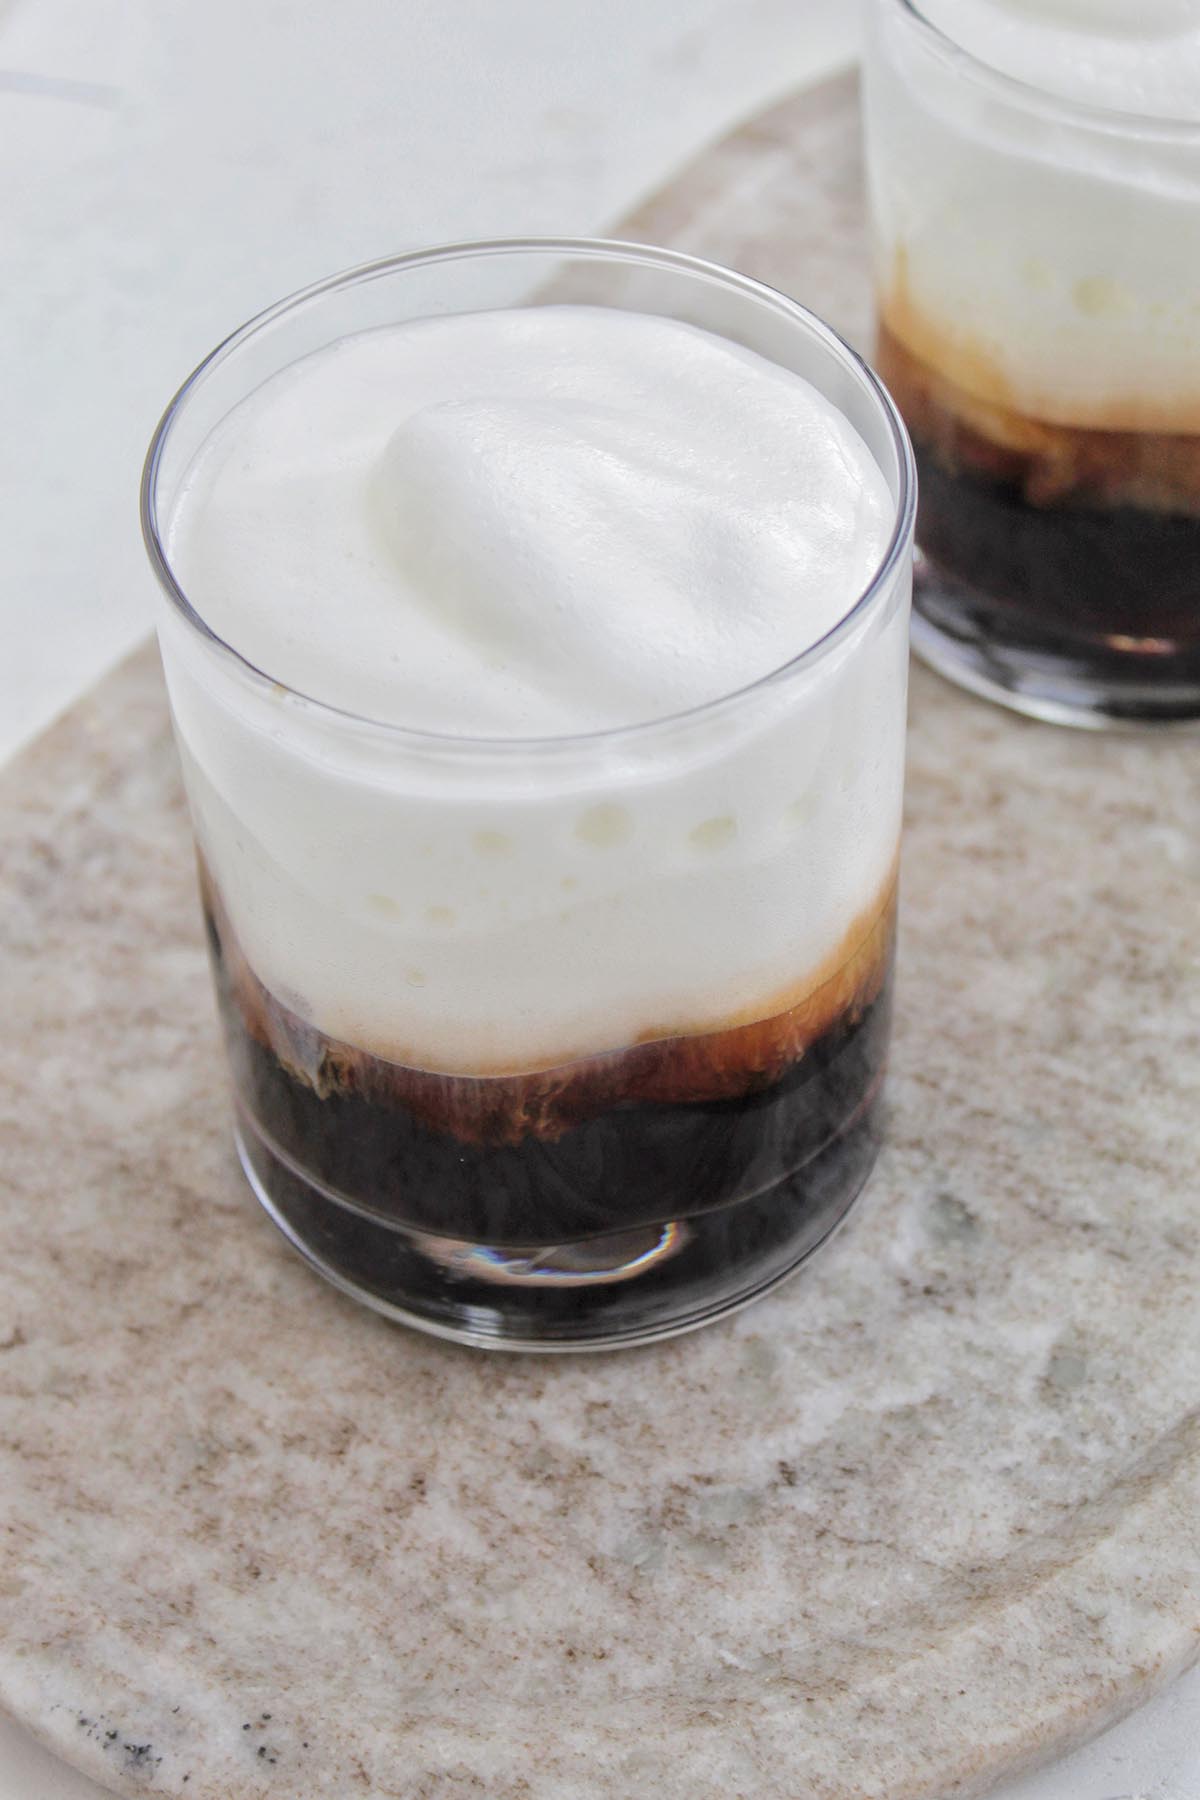 lowball glass filled with coffee and cold foam.